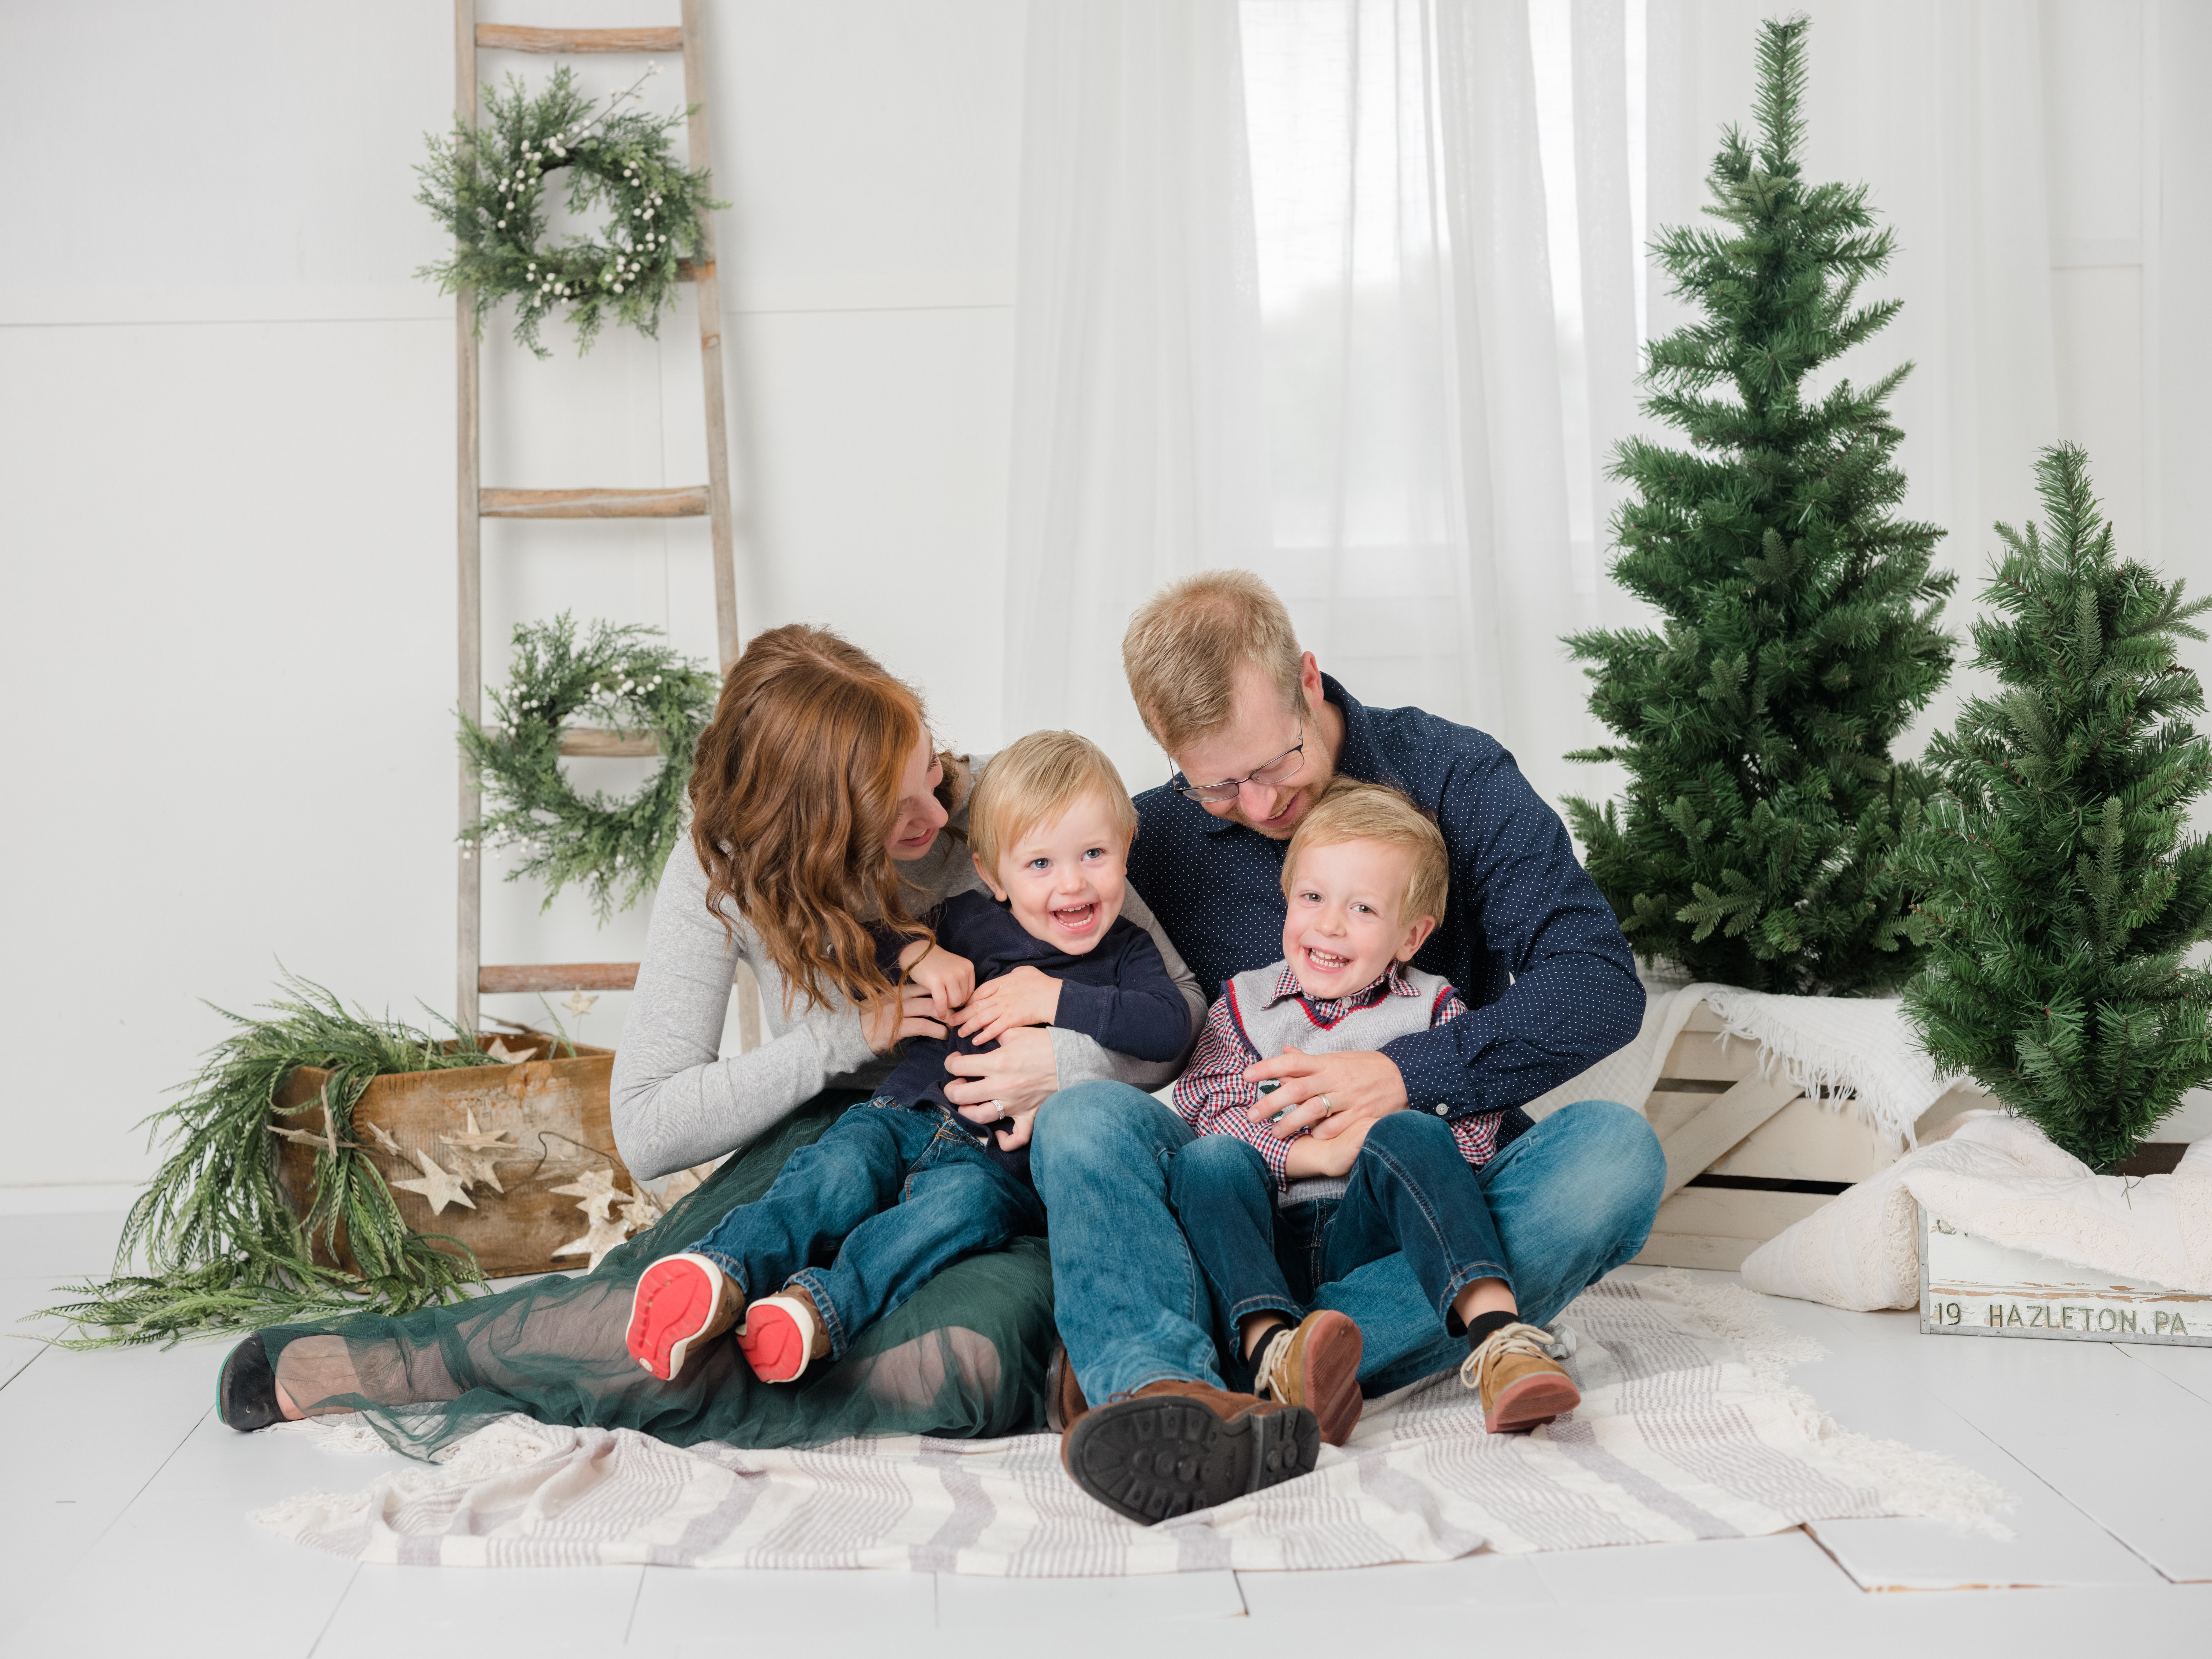 Mom and dad with 2 young boys in picture with christmas trees